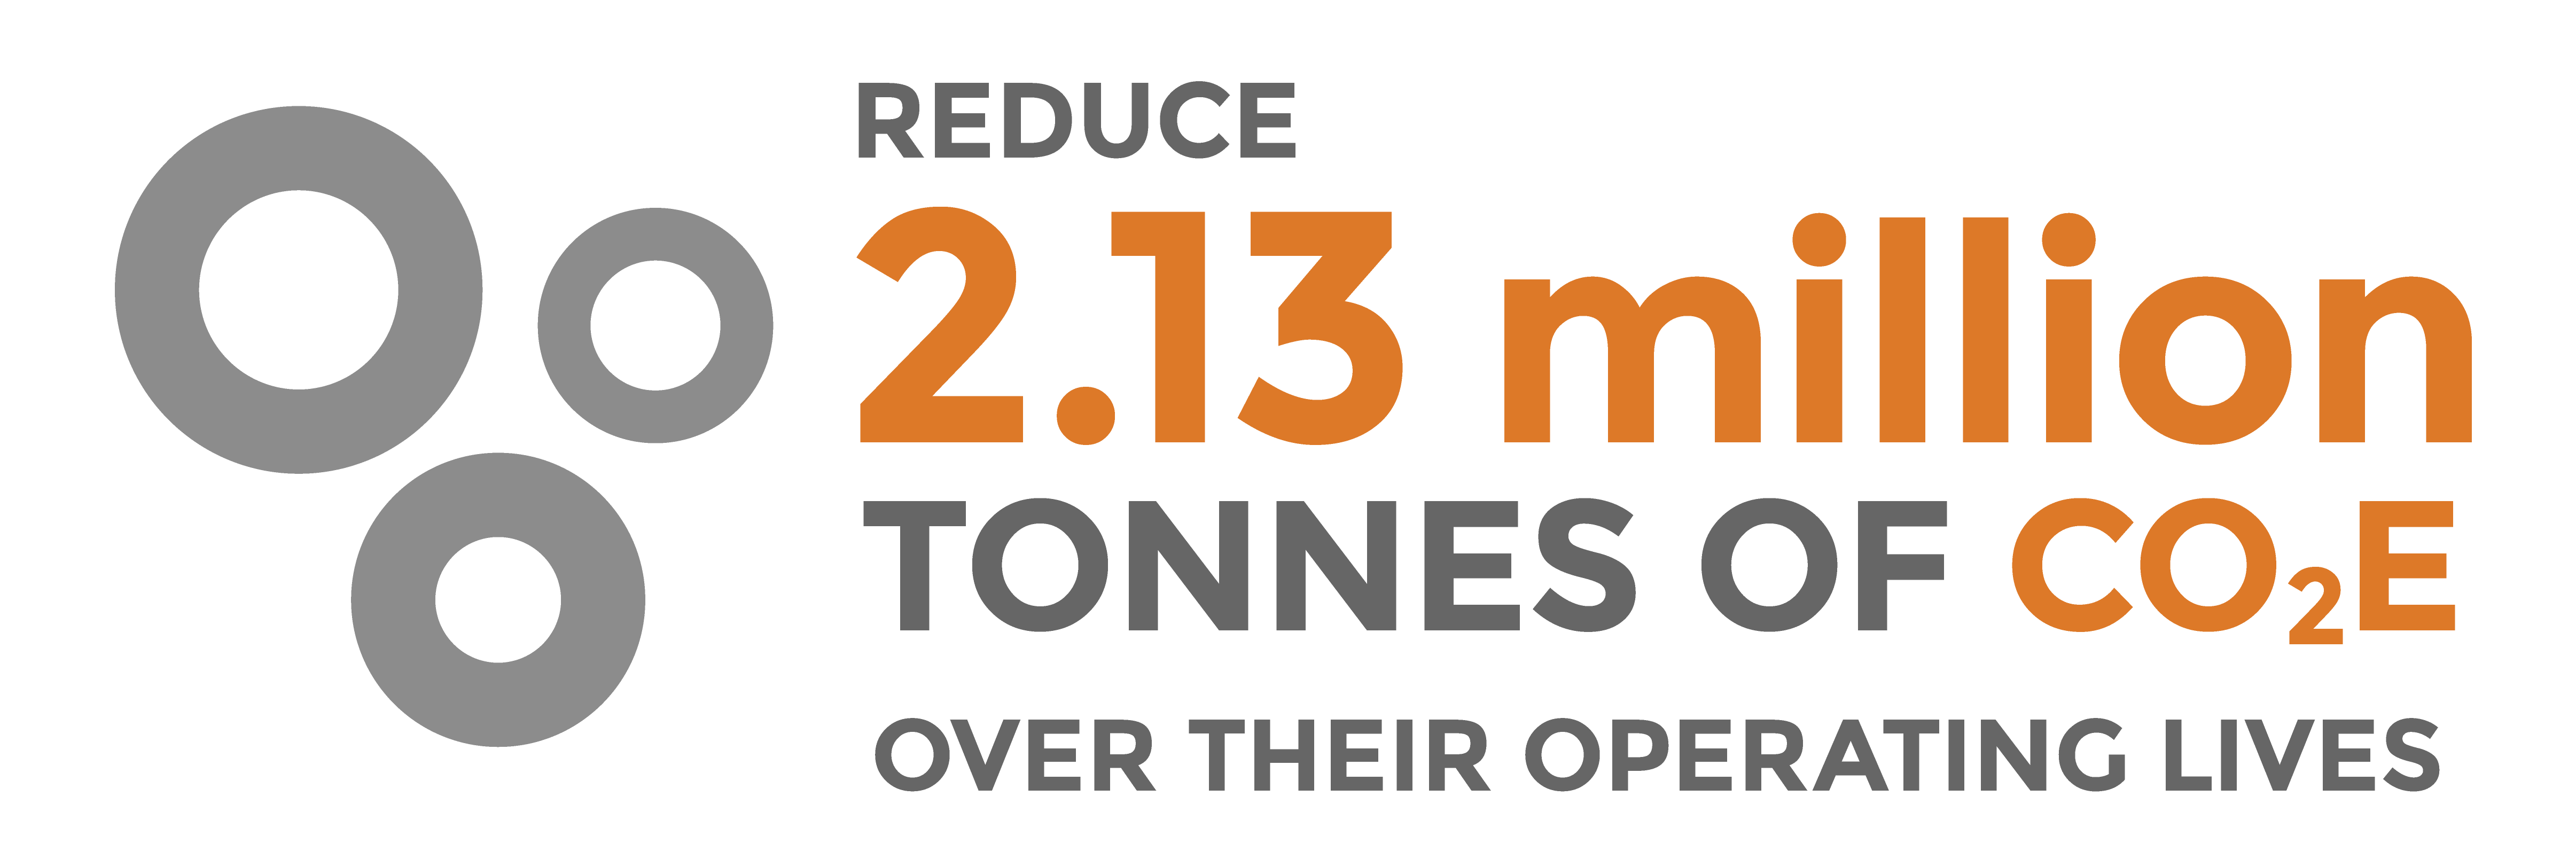 reduce 2.13 million tonnes of CO2e over their operating lives